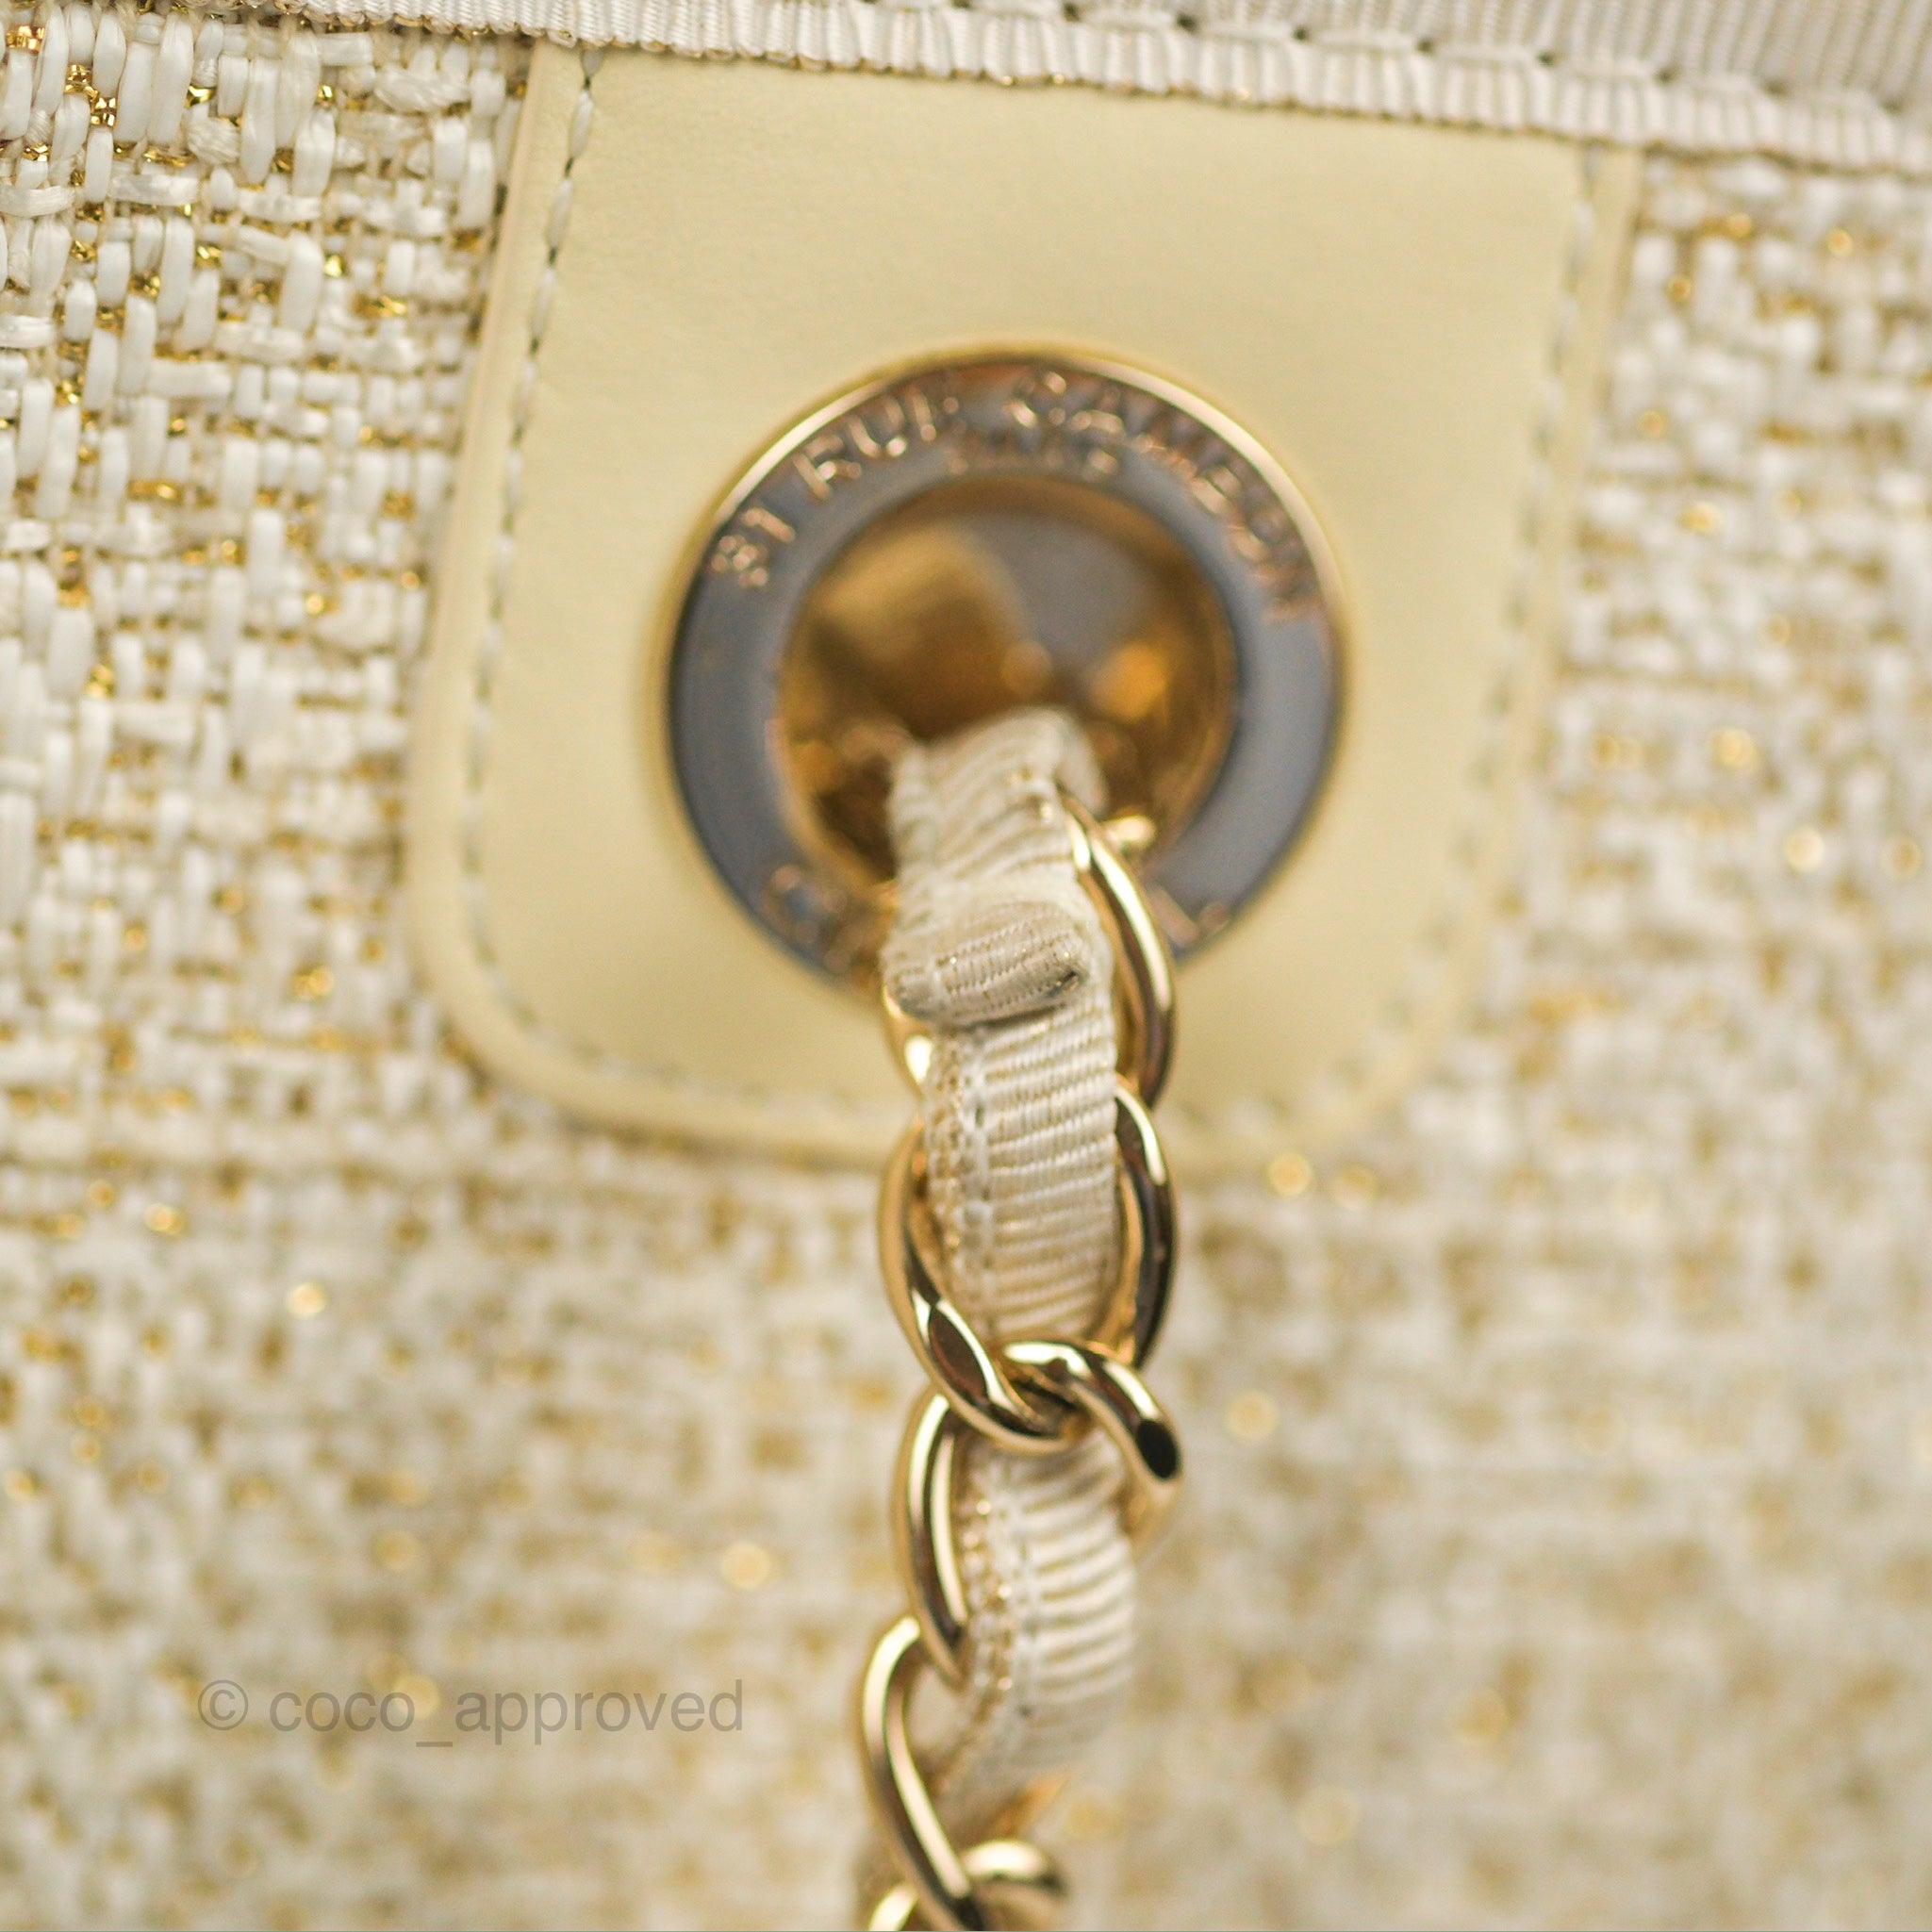 Chanel 2021 Ivory/ Gold Large Deauville Shopping Tote Bag at